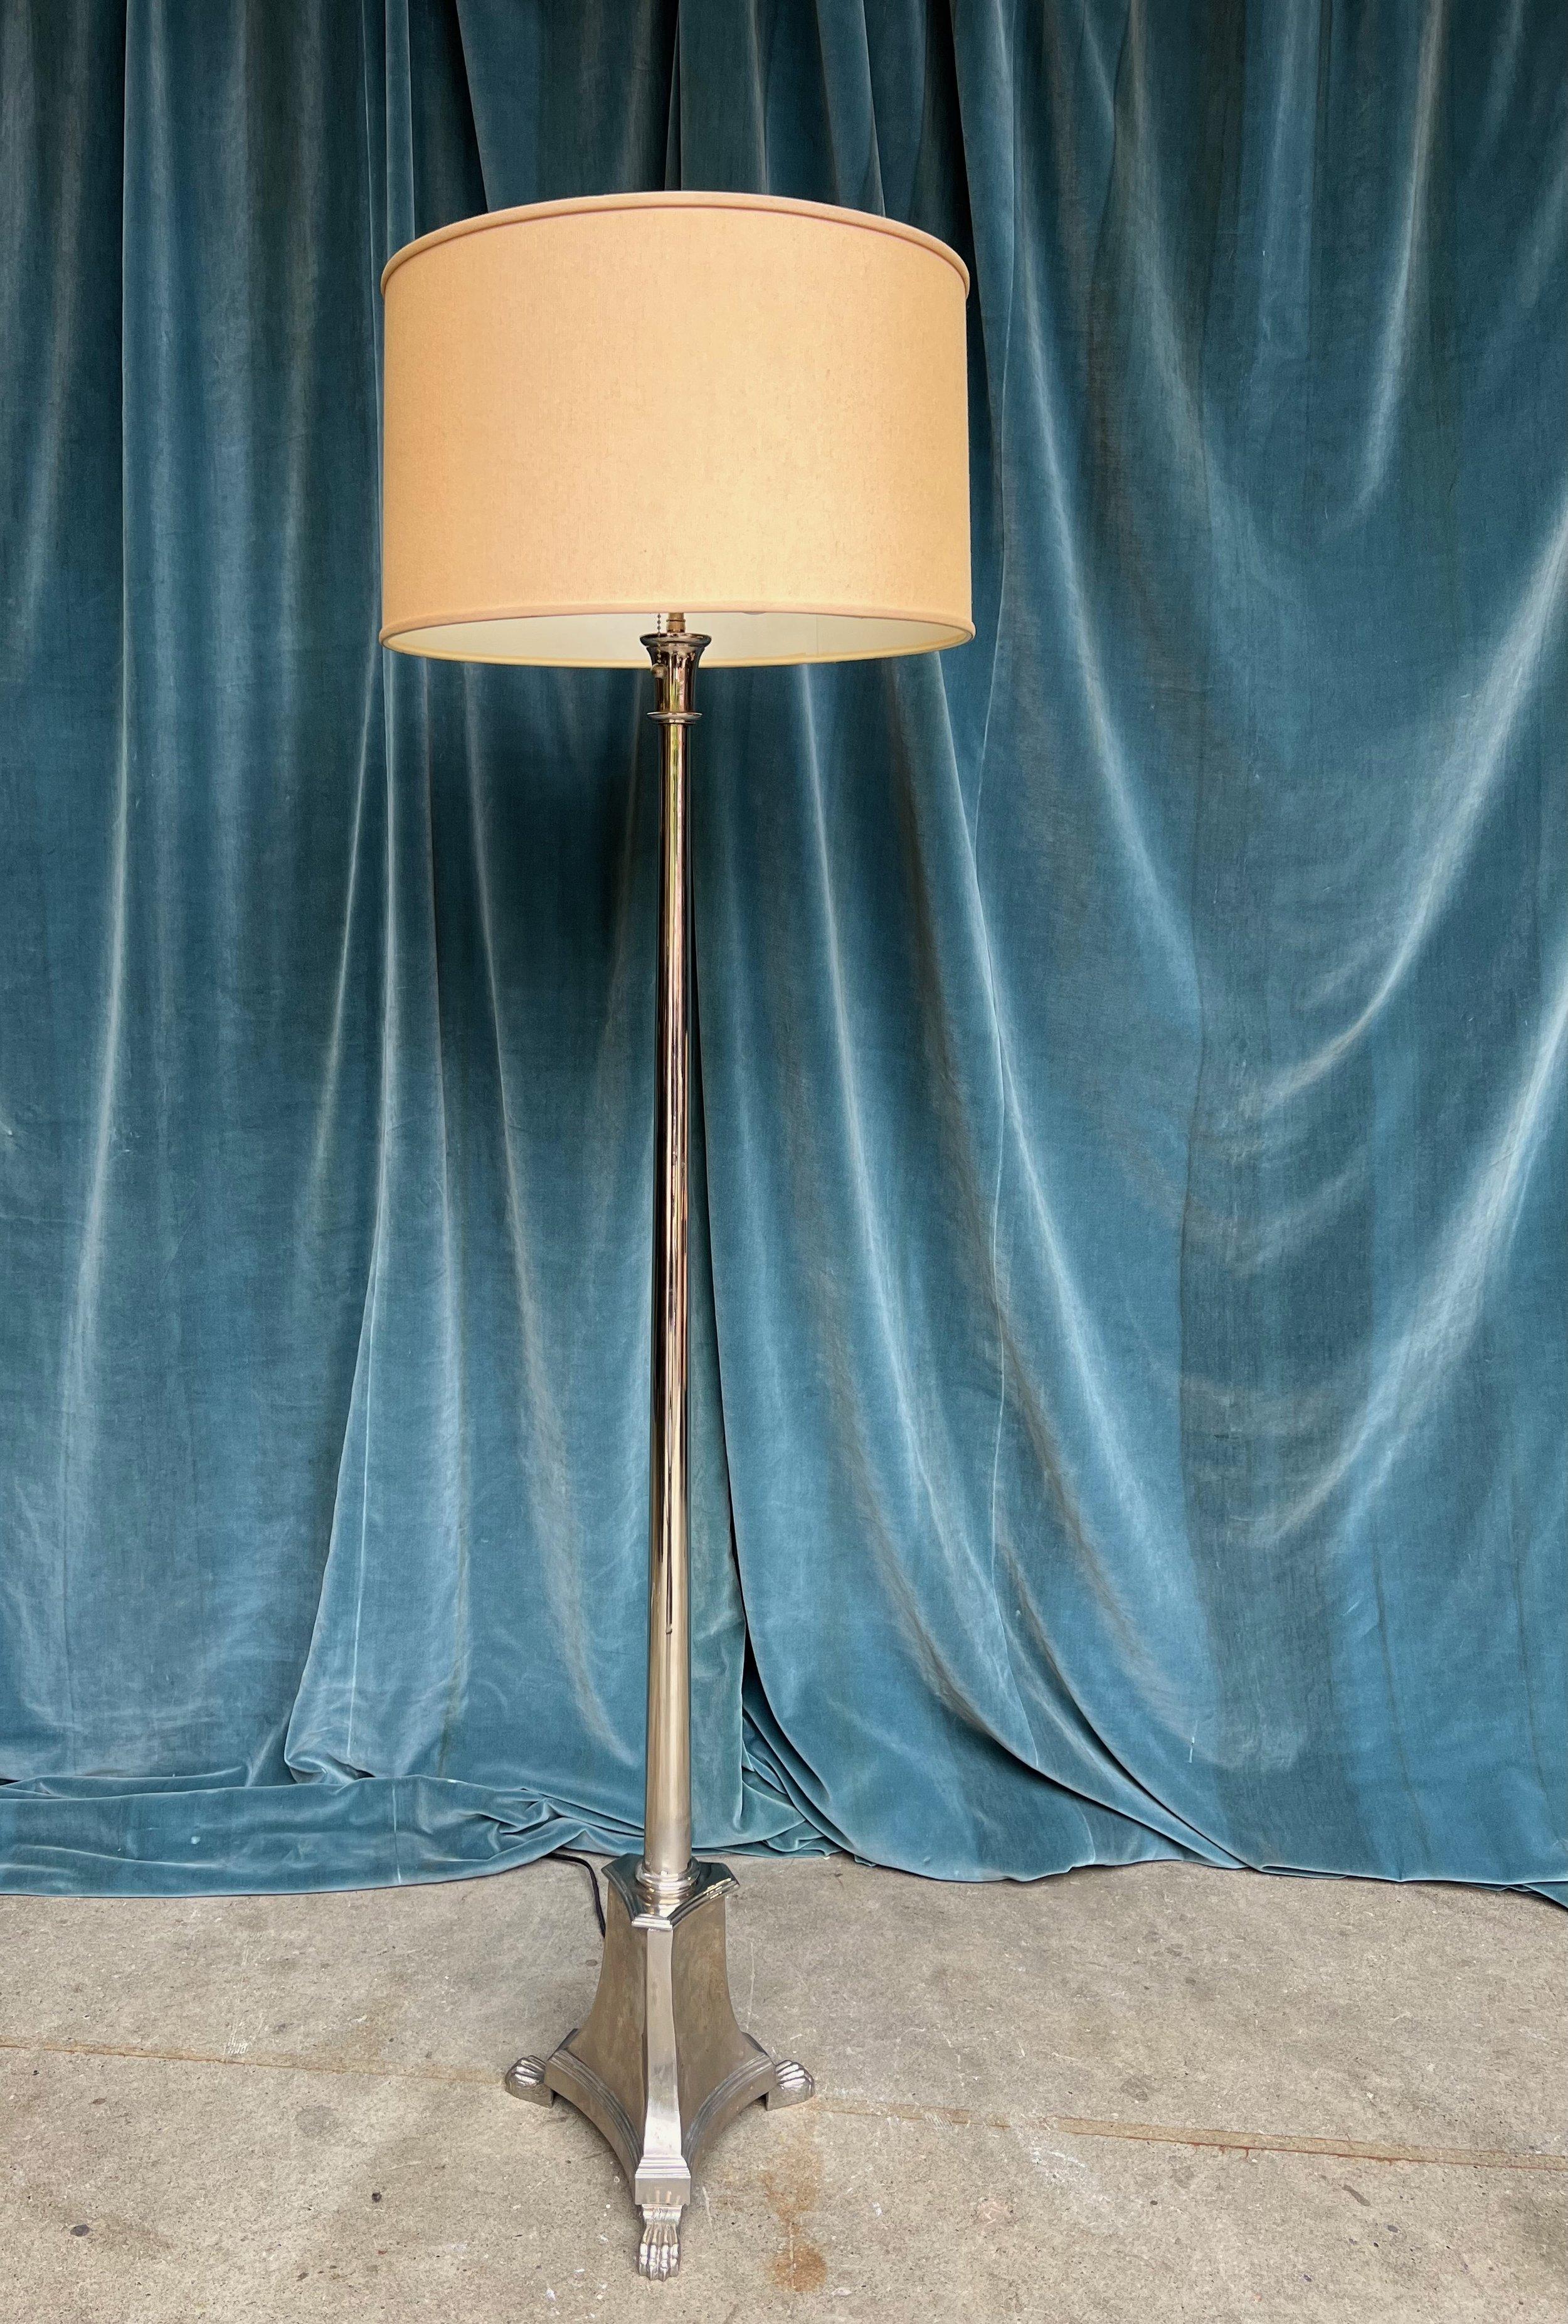 French 1940s Neoclassical Style Nickel-Plated Floor Lamp For Sale 2